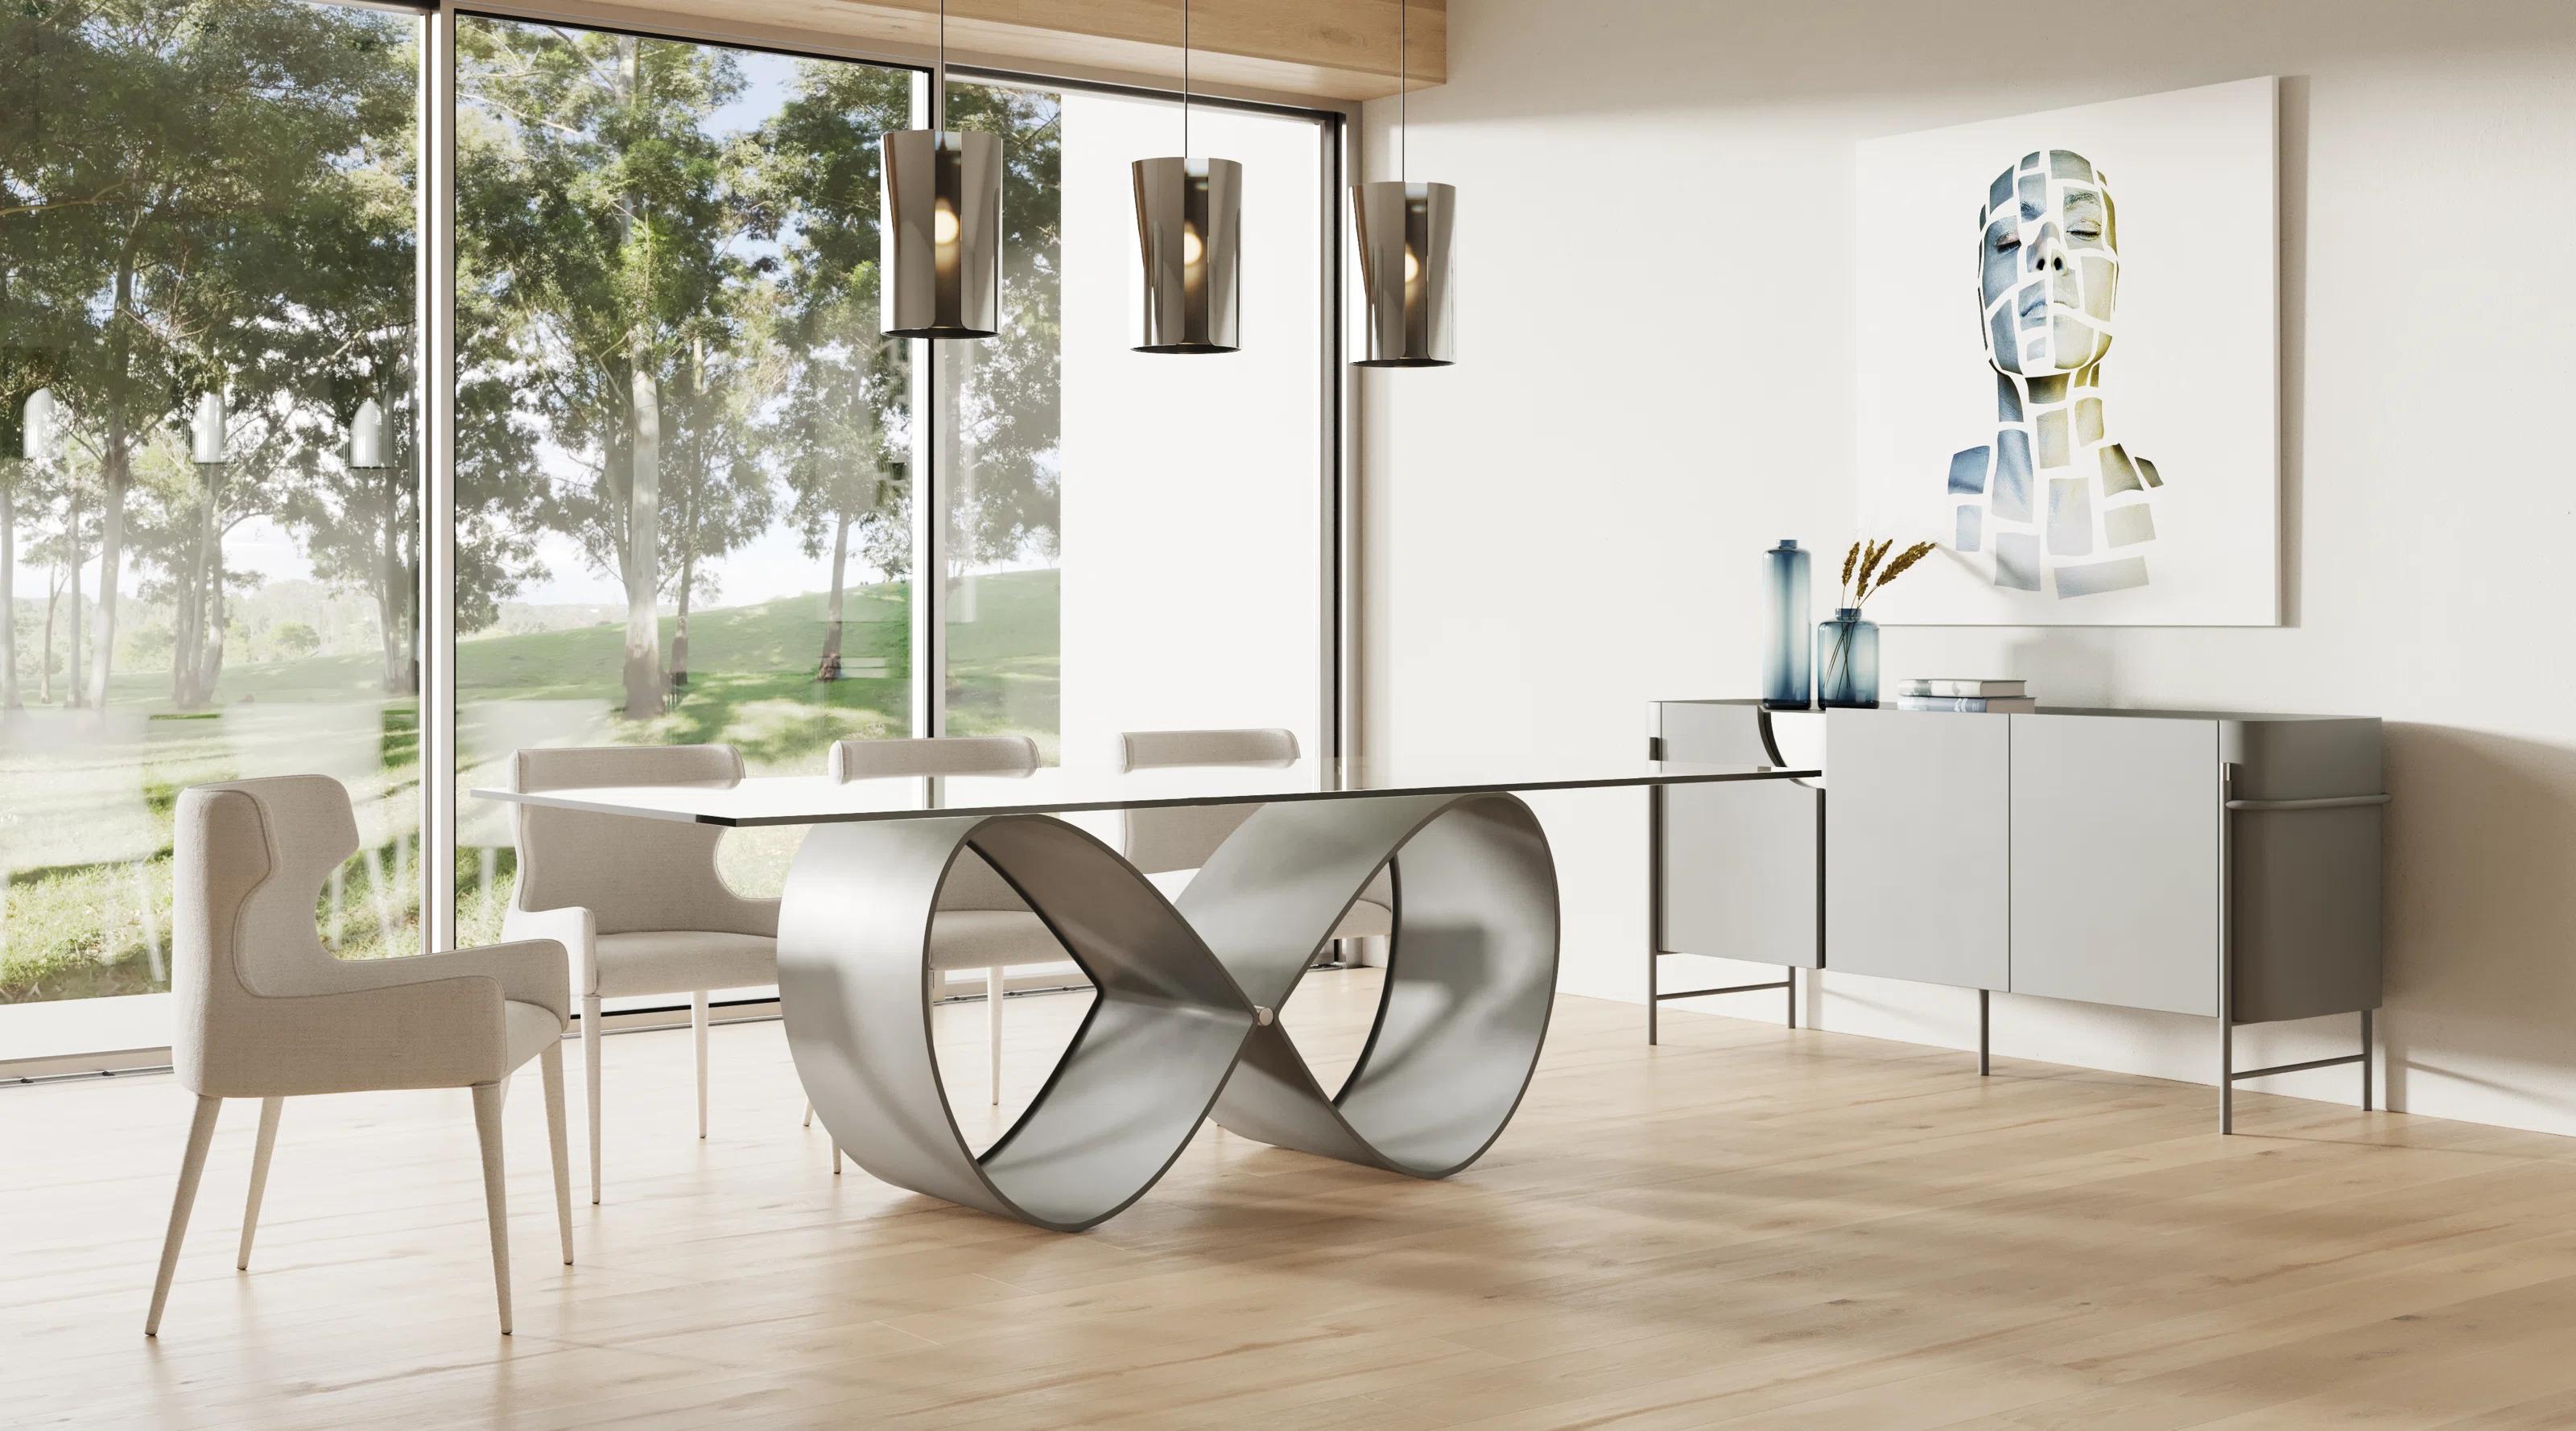 Contemporary, Modern Dining Table Set Hadley VGGM-DT-CASTA-DT-5pcs in Silver Fabric